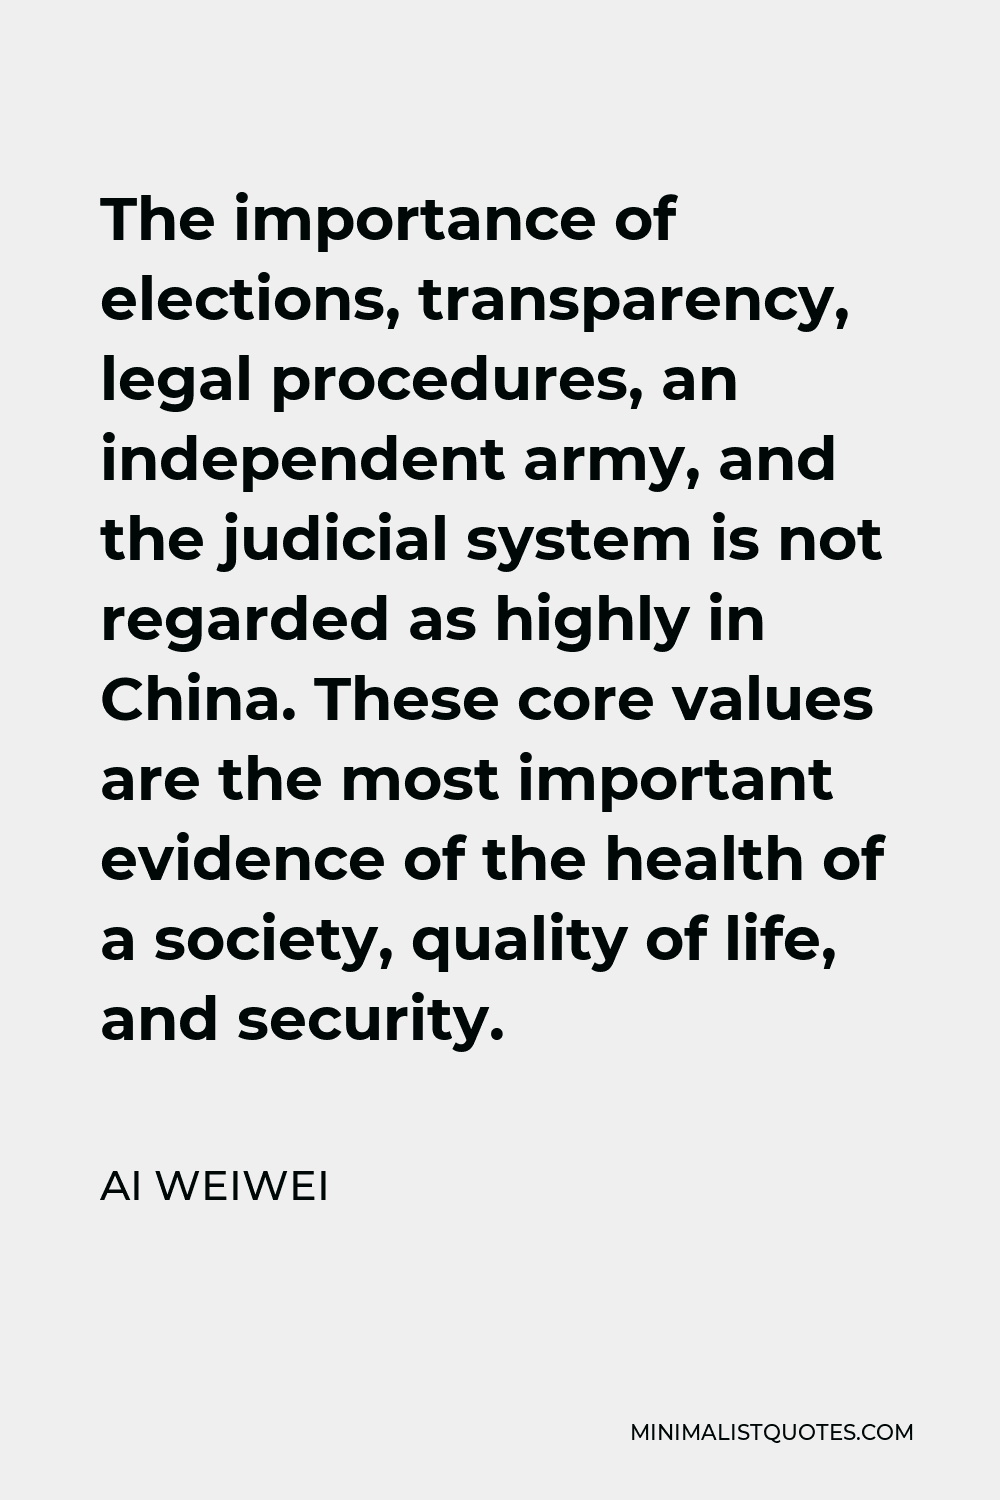 Ai Weiwei Quote - The importance of elections, transparency, legal procedures, an independent army, and the judicial system is not regarded as highly in China. These core values are the most important evidence of the health of a society, quality of life, and security.